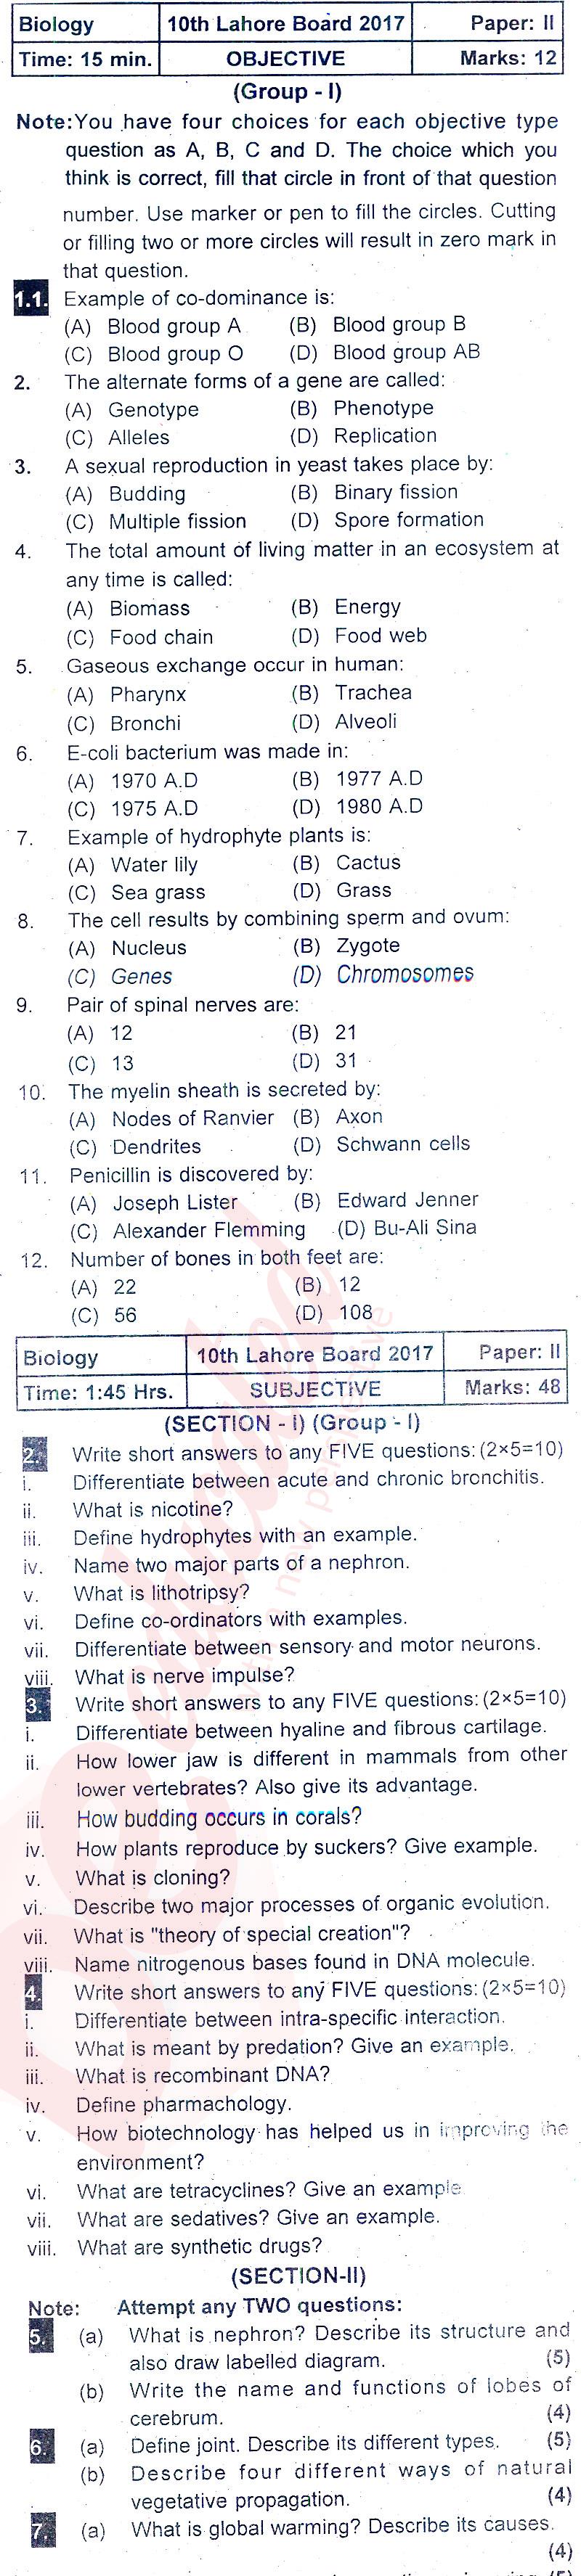 Biology 10th class Past Paper Group 1 BISE Lahore 2017